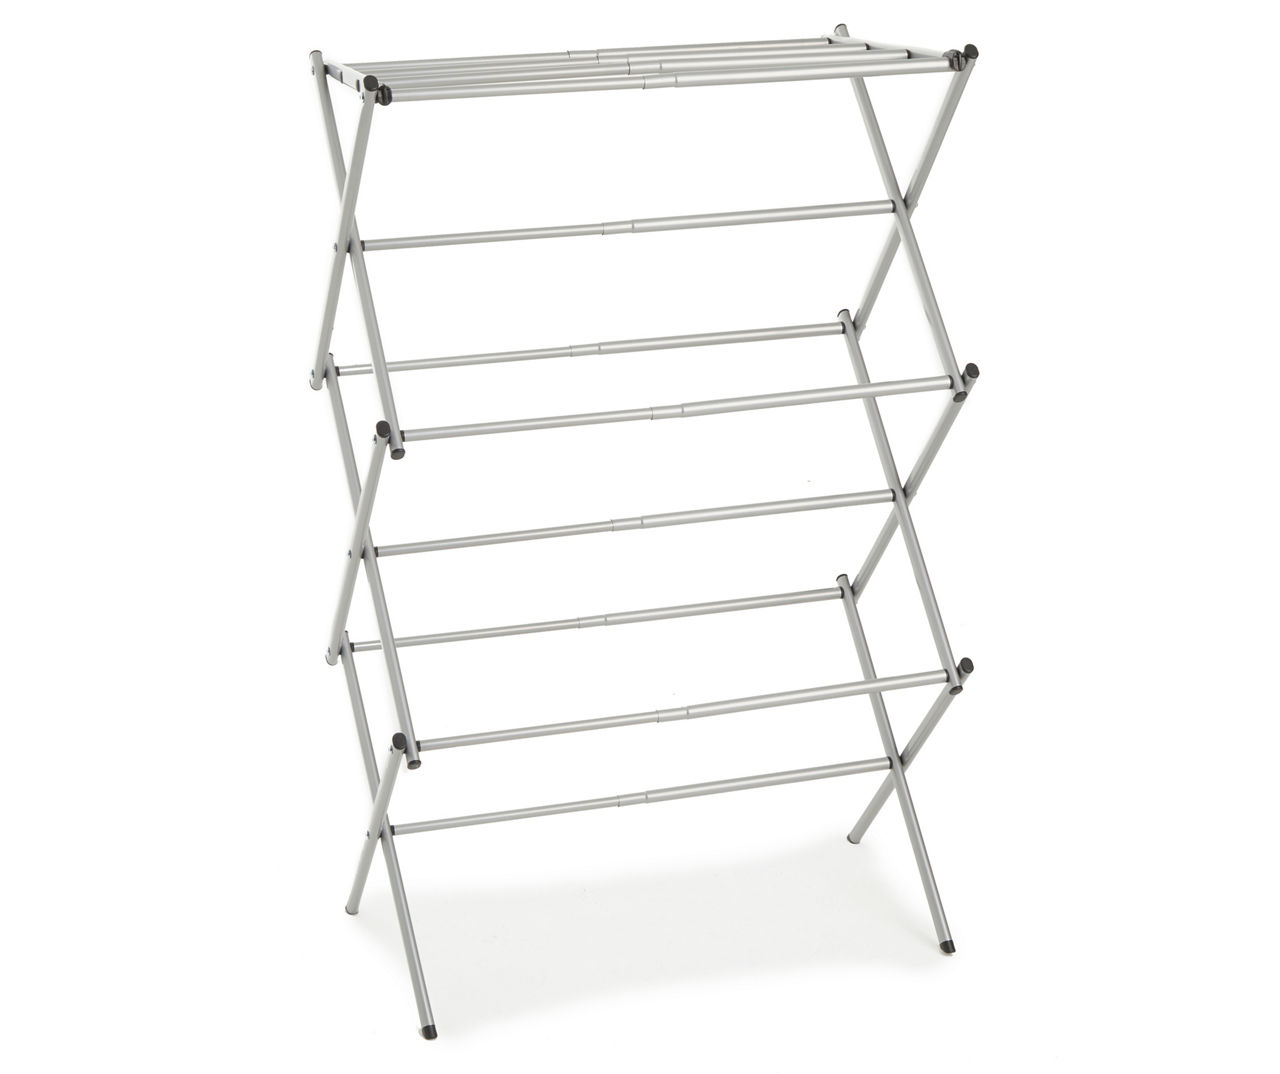 Stainless Steel Cloth Drying Stand - Check Now!